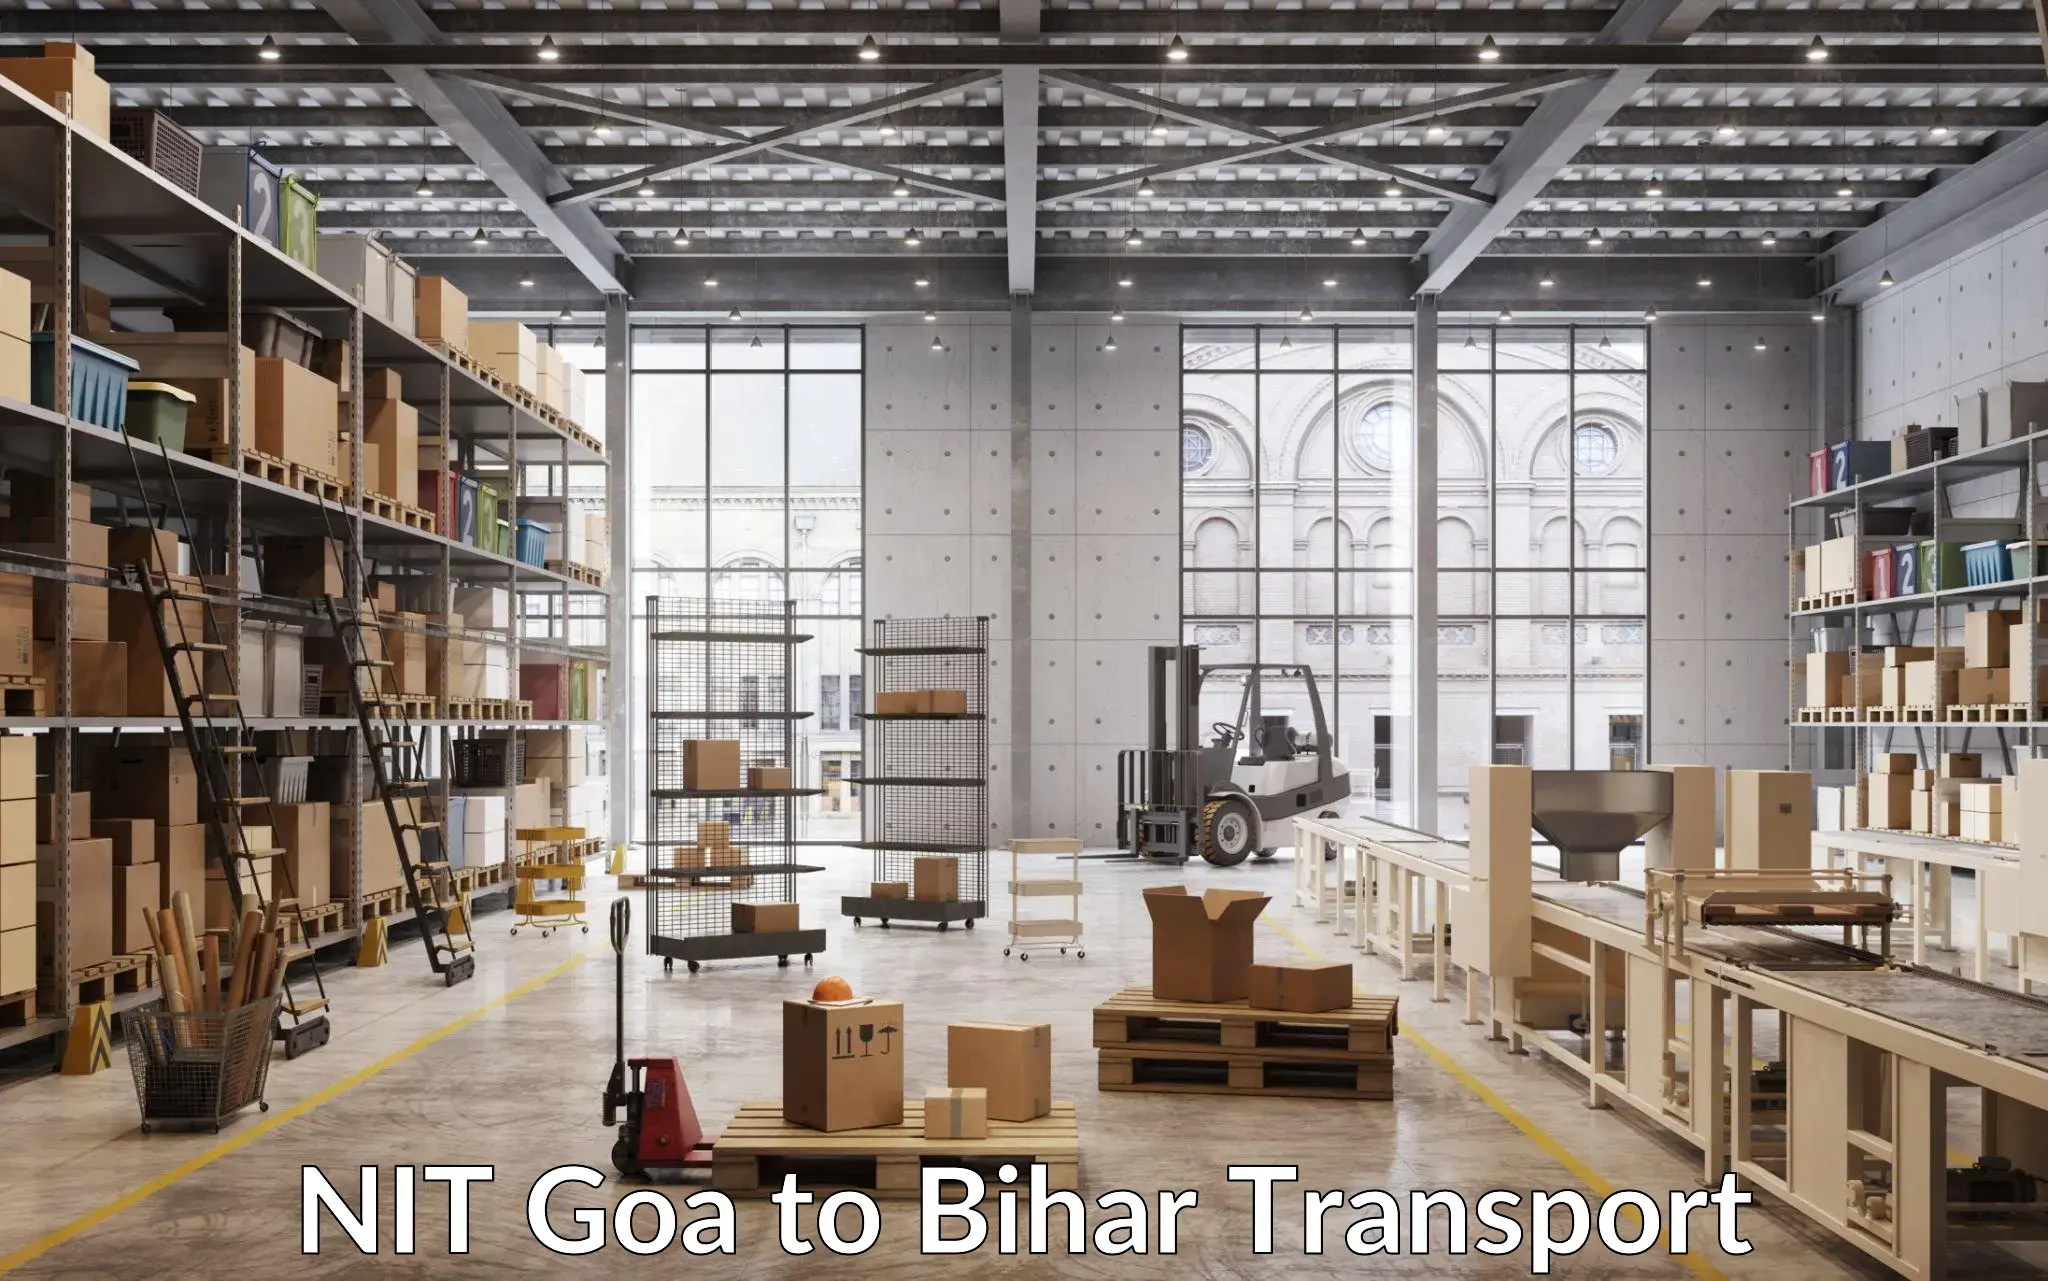 Air freight transport services NIT Goa to Bhorey